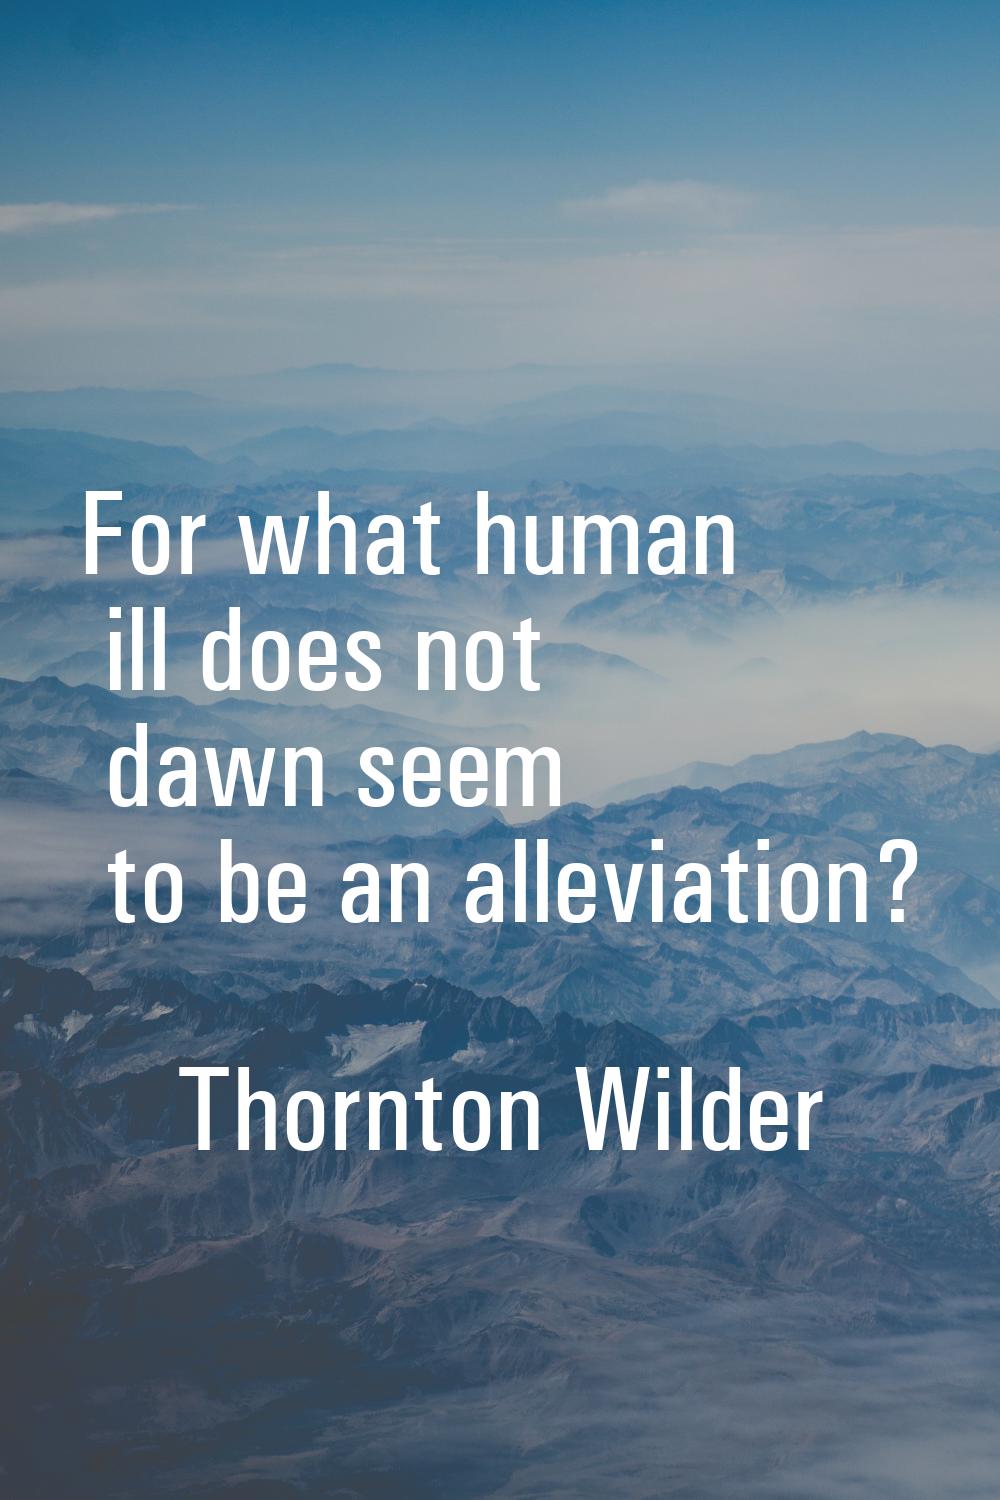 For what human ill does not dawn seem to be an alleviation?